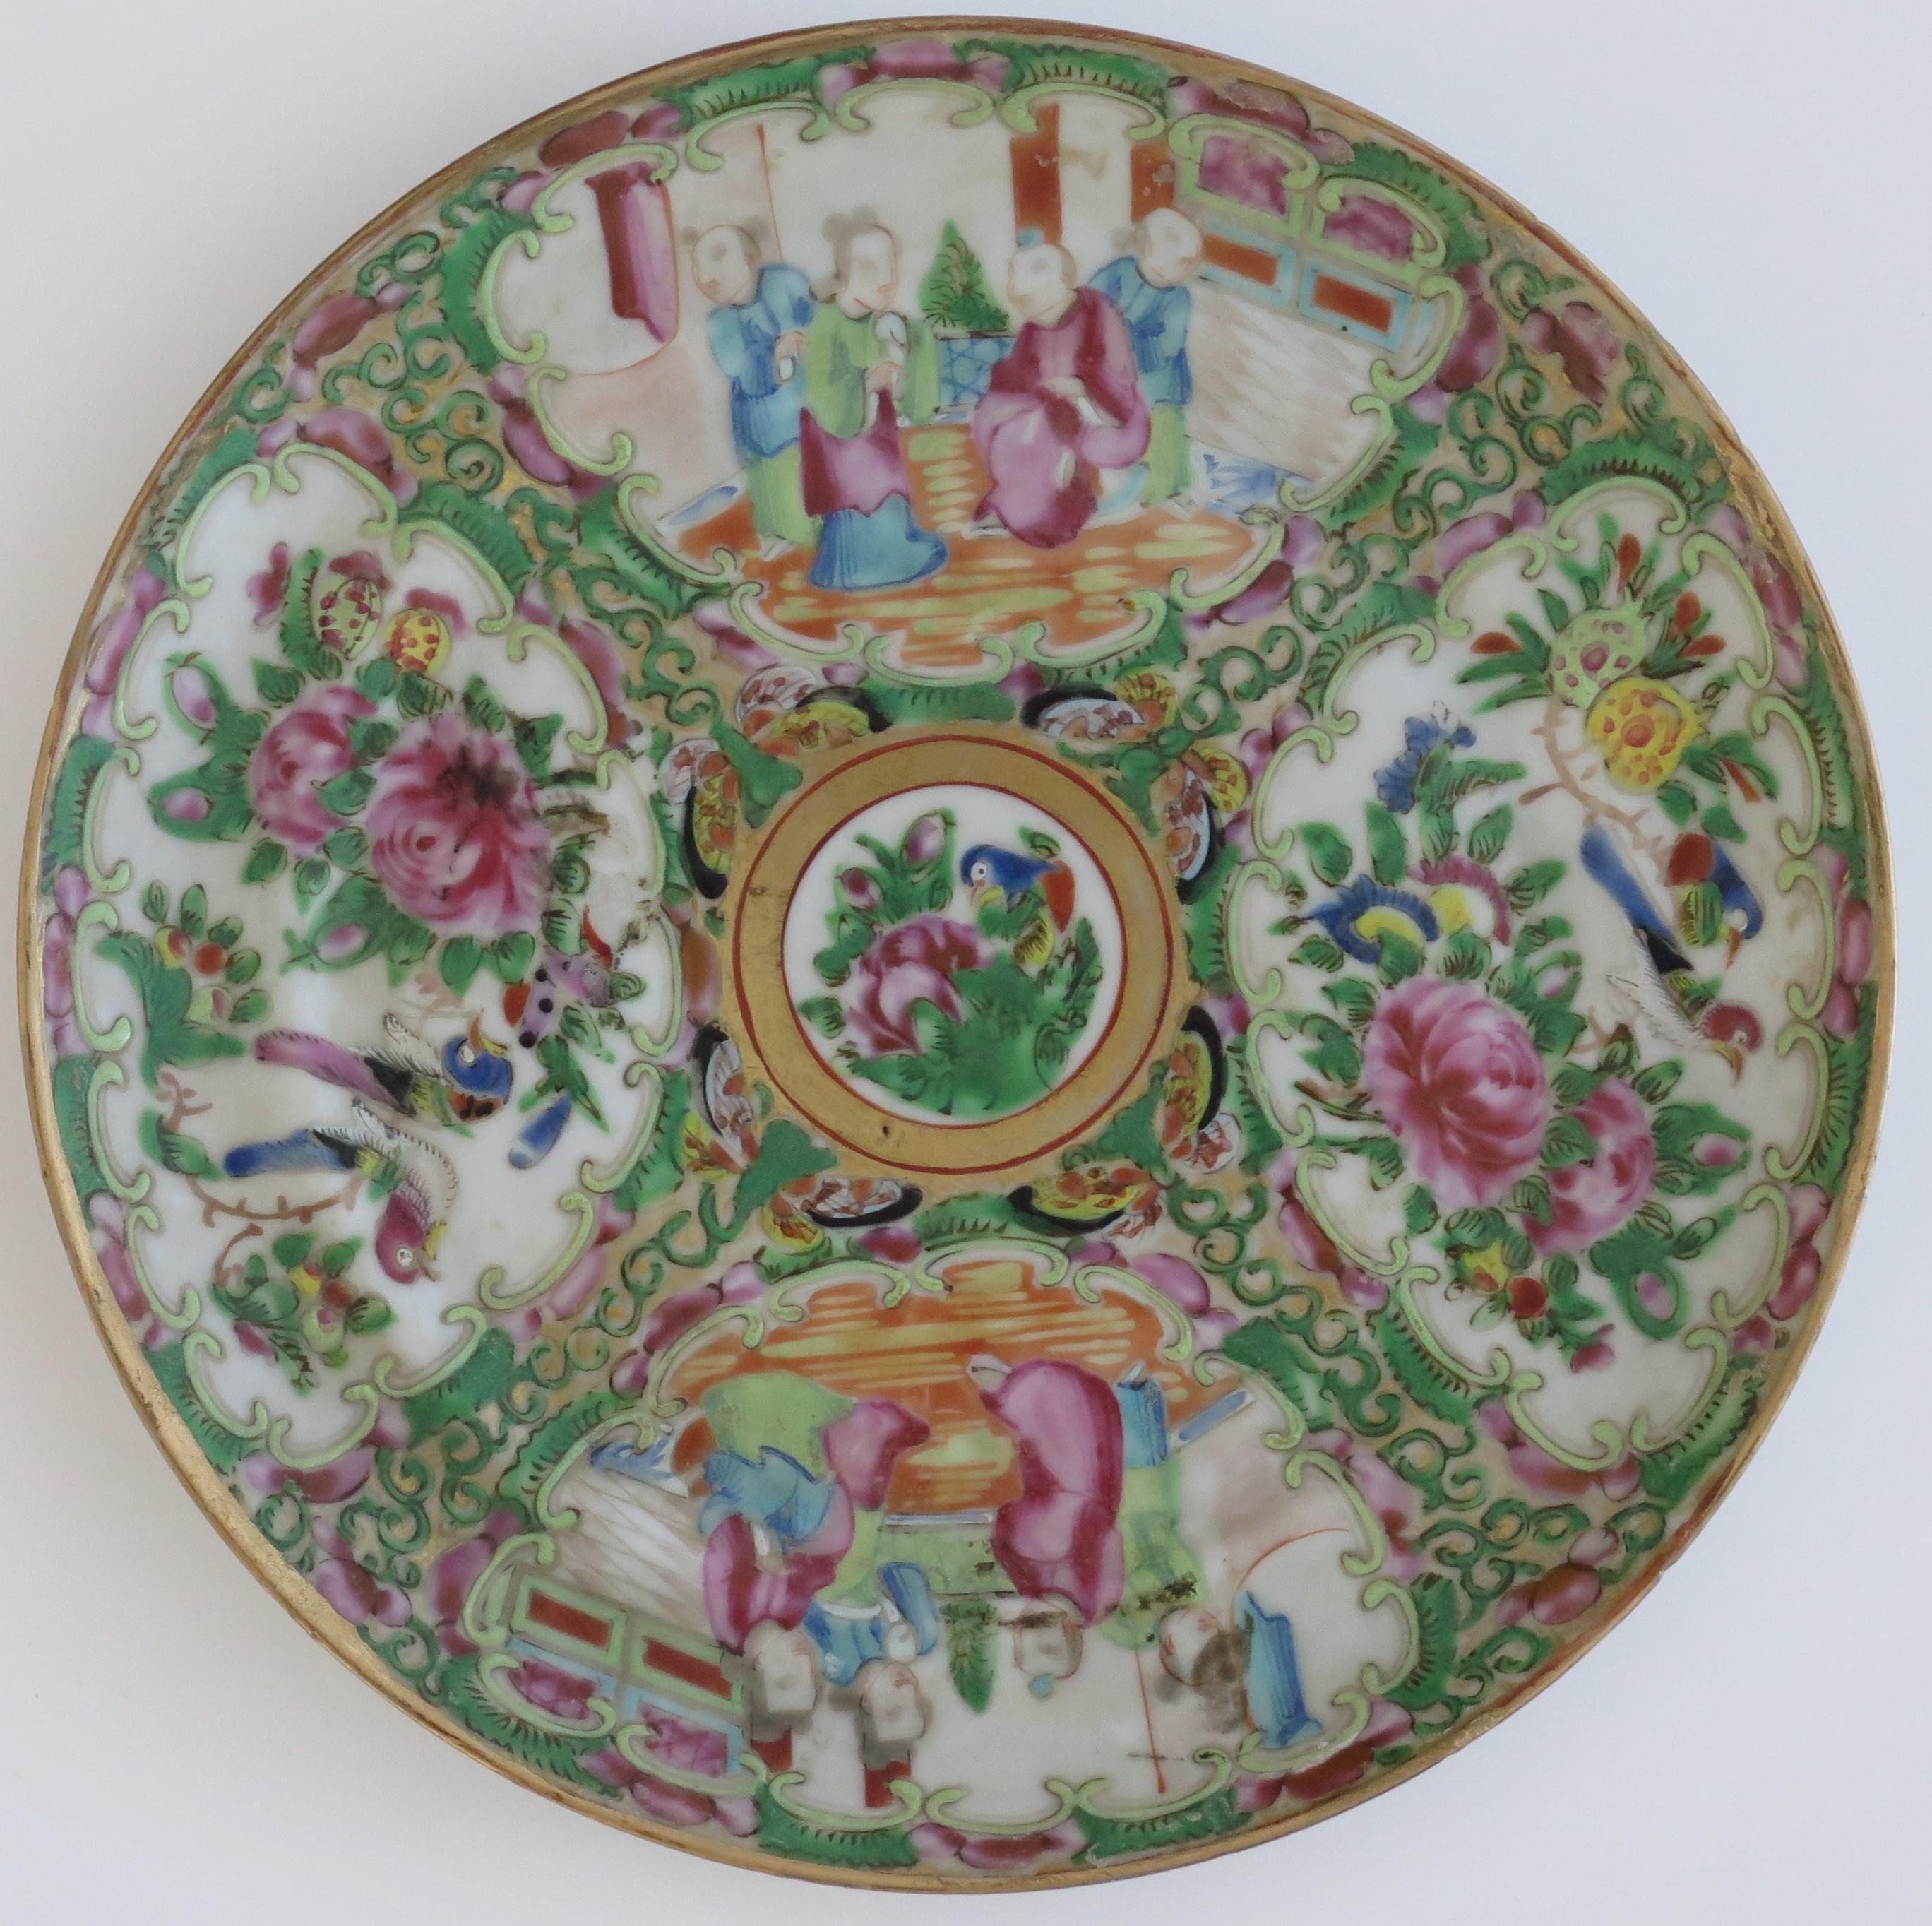 This is a very decorative Chinese Export, porcelain, Rose Medallion dish or plate which we date to the 19th century, Qing dynasty, circa 1875.

It is hand painted in the Canton or Chinese export, rose medallion decoration with four panels